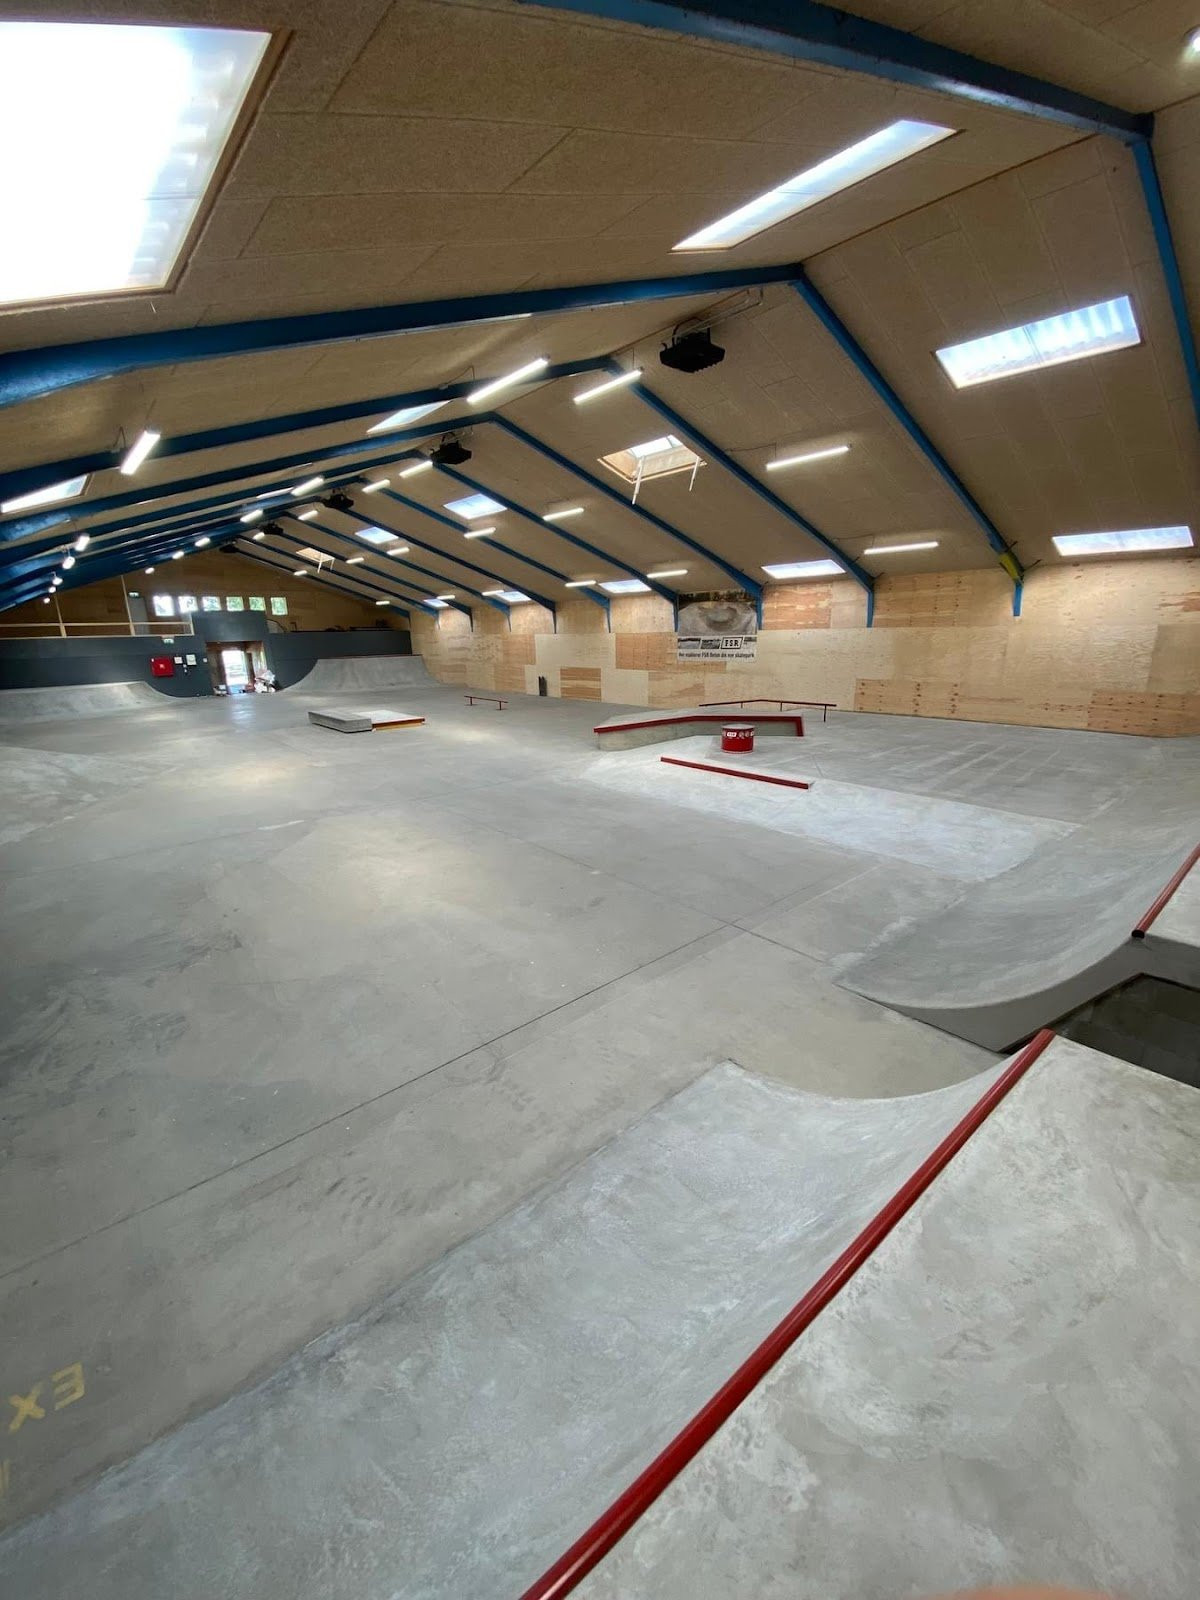 Sønderborg Skatepark is probably the largest indoor park in Southern Jutland. The park has everything a skater could possibly need and very favourable offers for the members of the park.The park has banks and quarter pipes in each end of the park with obstacles in between. The obstacles meet all needs and includes a pyramid box, a flat bar with kink as well as a fly-out.Surrounding the obstacles is everything from practice rails to grind boxes and manual padsEverything in the park is made of wood and steel and seems to be of a good quality.Sønderborg Skatepark is a little unique as it offers its members a great responsibility. For visitors, the park is only open two days a week (Tuesday and Thursday) for a couple of hours, while the members can enjoy opening hours between 2pm and 10pm on weekdays and between 10am and 10pm on the weekends. Members have a chip so that they can always access the park during opening hours.A locker at Sønderborg skatepark costs 600 DKK half-yearly. Furthermore, there is a registration fee of 100 DKK.For children under the age of 13, the price is 300 DKK half-yearly and 100 DKK for the registration fee.Sønderborg skatepark helps new, inexperienced skaters to get started by offering classes. The duration of the classes vary. If you would like to know more about the classes at Sønderborg Skatepark, please contact them by phone or search for more information on their website (see ‘contact’)You can get in touch with Sønderborg Skatepark and find the newest updates&nbsp;here